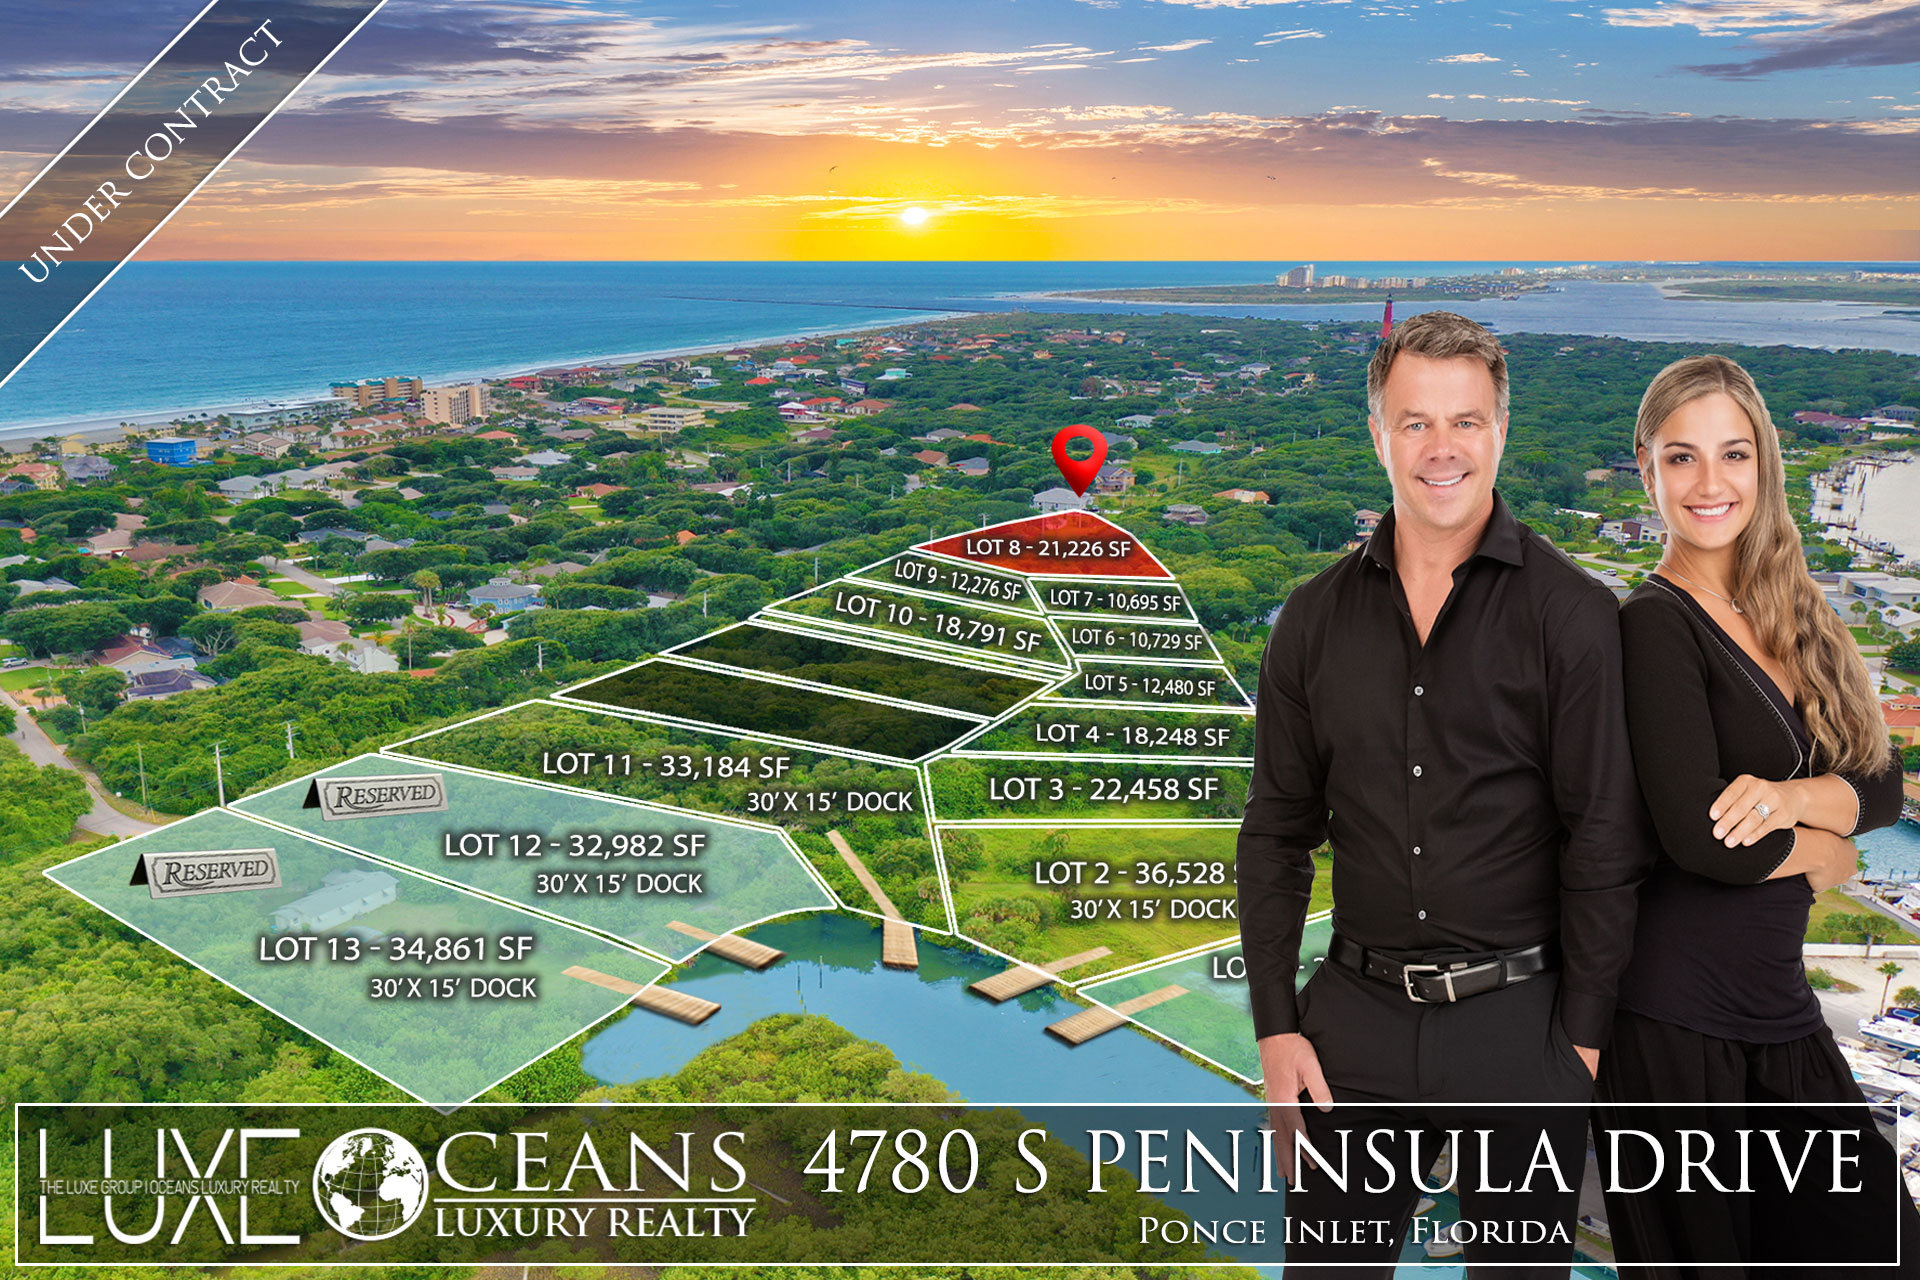 Ponce Inlet Real Estate For Sale. 4780 S Peninsula Drive Beachside Inlet Harbor Estates  land Under Contract 